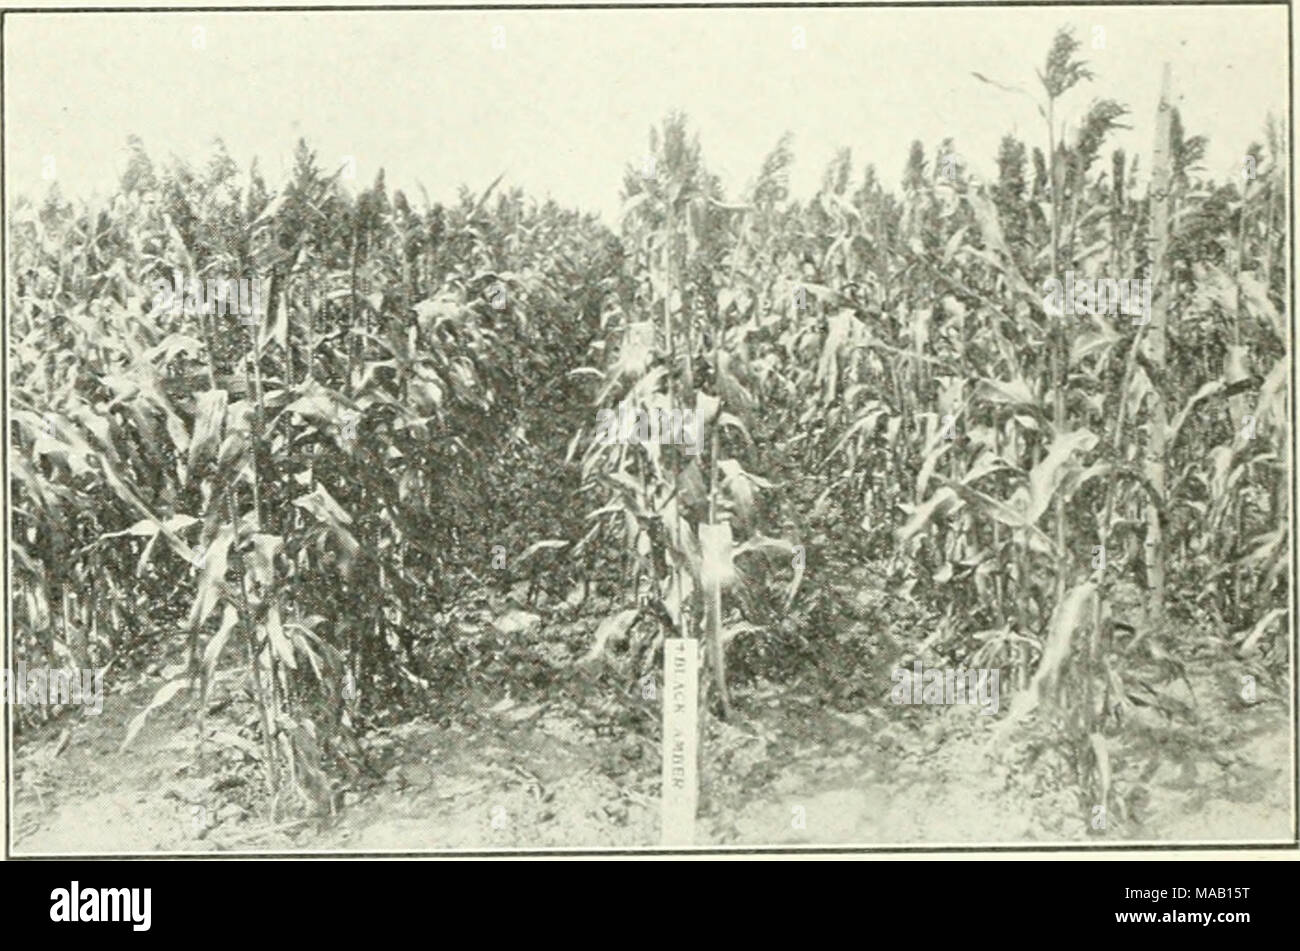 . Dry farming in western Canada . Fig. 99.—Black Amber Sorghum in Kansas. This is one of the leading typos of drought-resistant forage crops in the South. after the sorghum crop in place of the fallow. It is only under the most favorable conditions that corn should be used in this way. 250. Kansas Dry Farm Crops.—The best dry farming crops in Kansas arc of two distincl kinds. First, those that are able to withstand extremely hot summer weather and take advantage of moisture whenever rain may occur and second, those thai mature early enough in the spring to escape the hot dry summer weather. Th Stock Photo